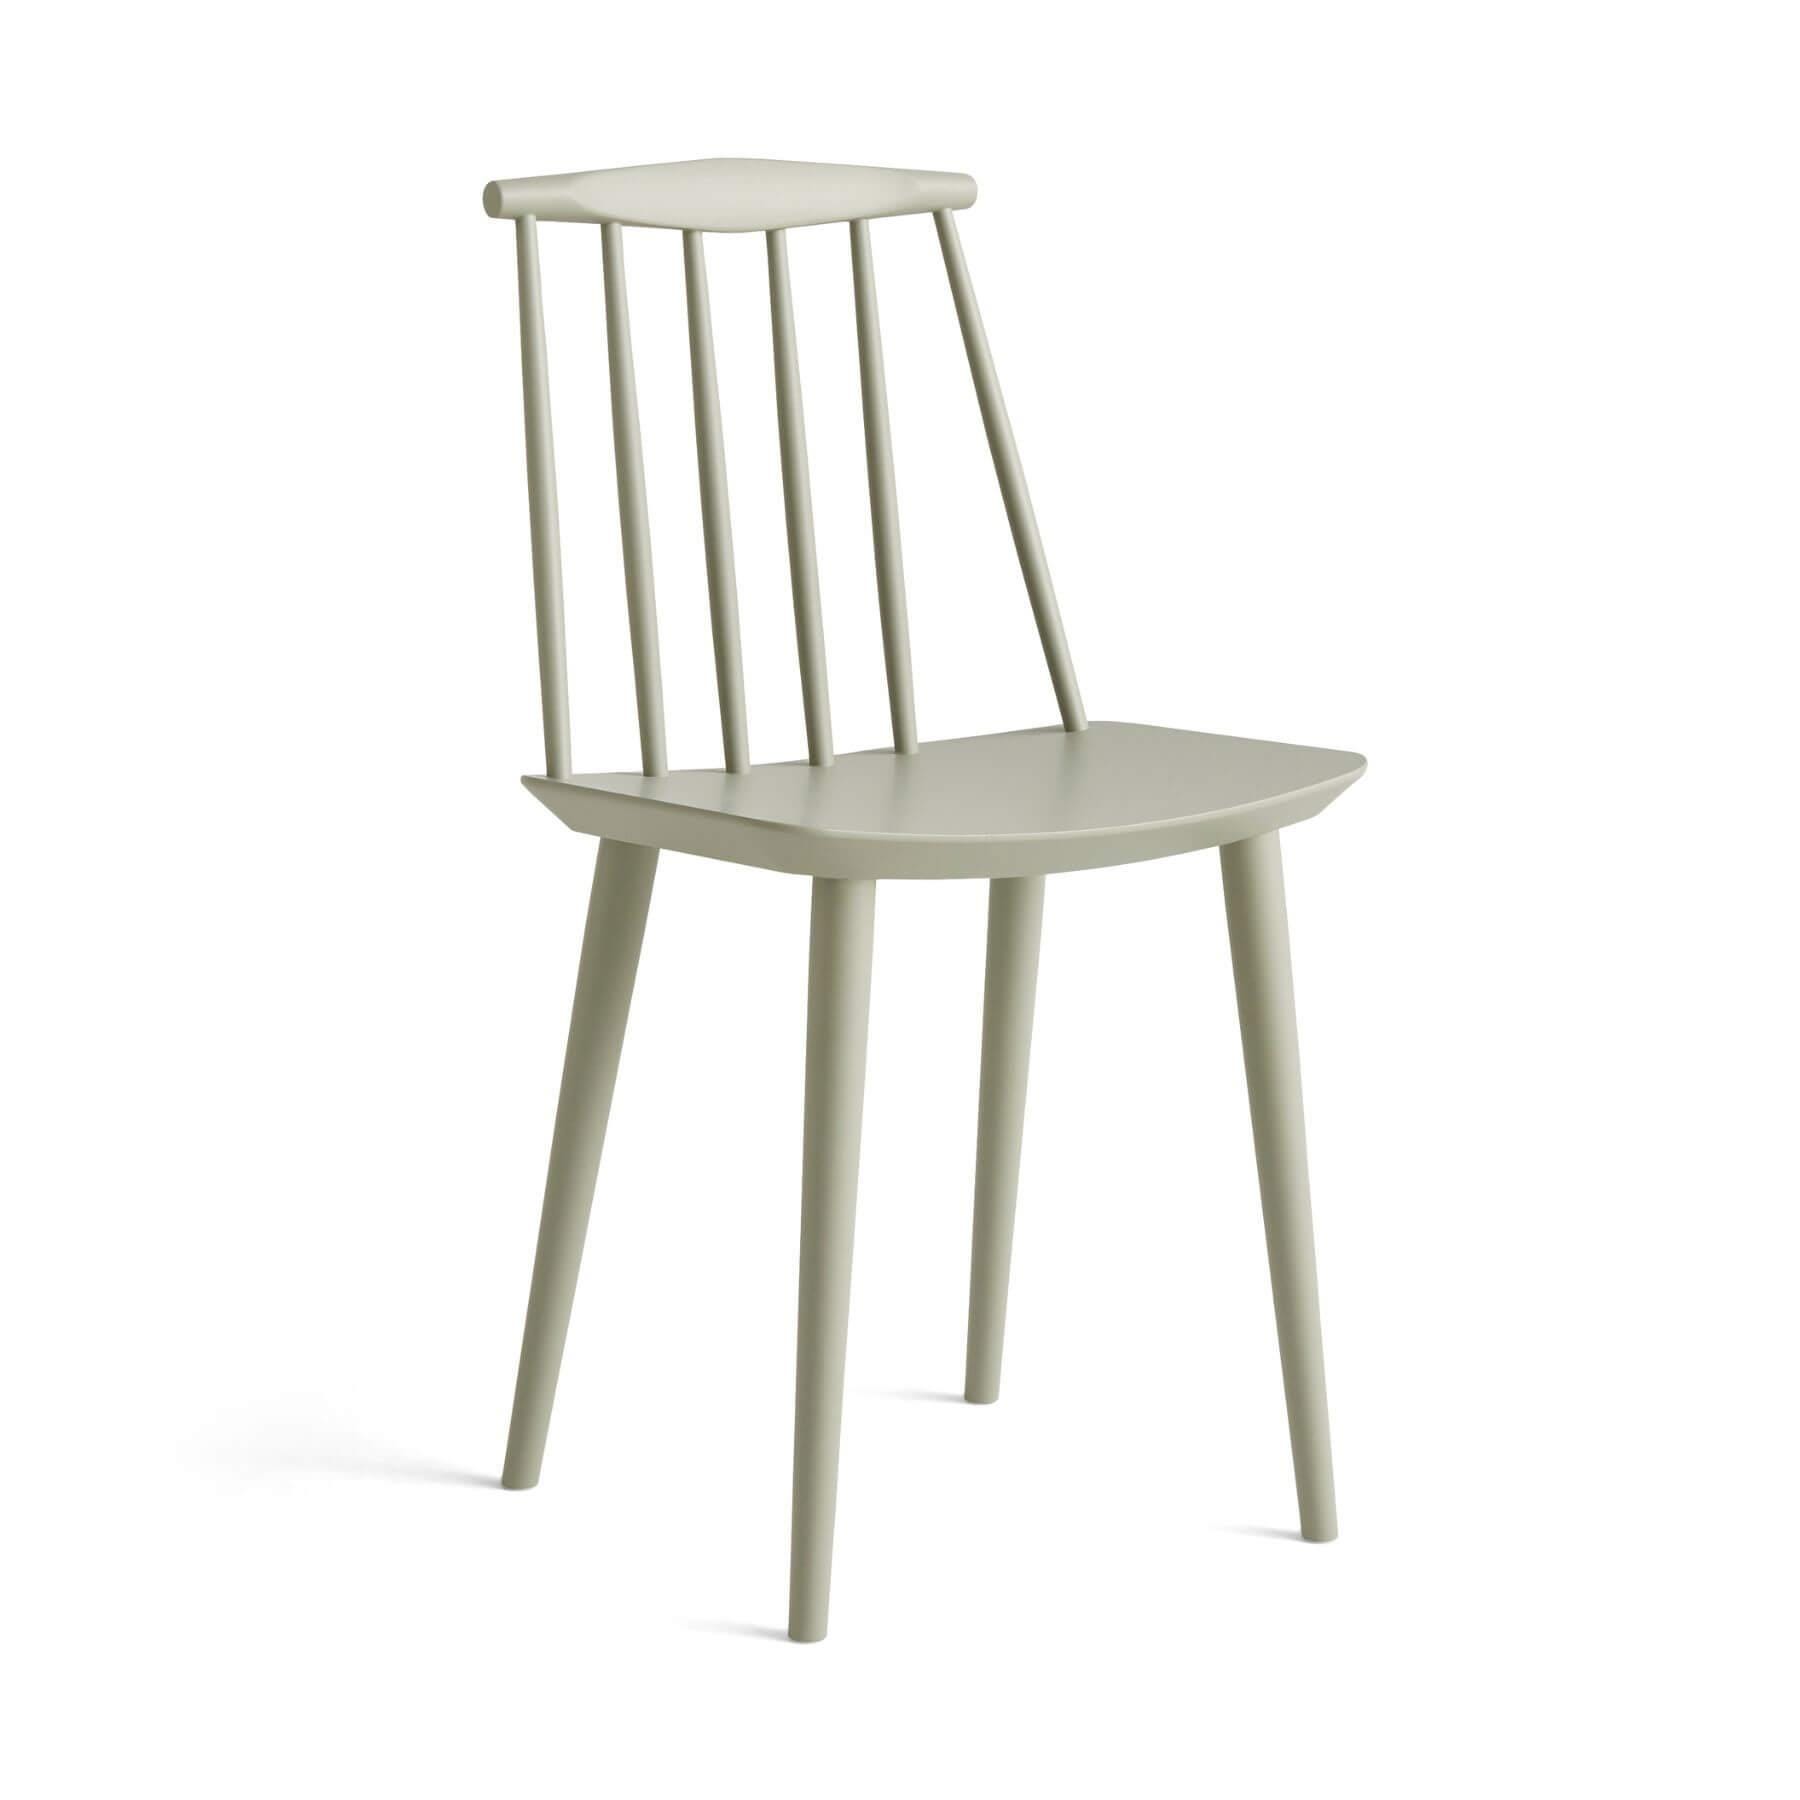 Hay Jseries 77 Dining Chair Beech Lacquered Sage Standard Gliders Green Designer Furniture From Holloways Of Ludlow